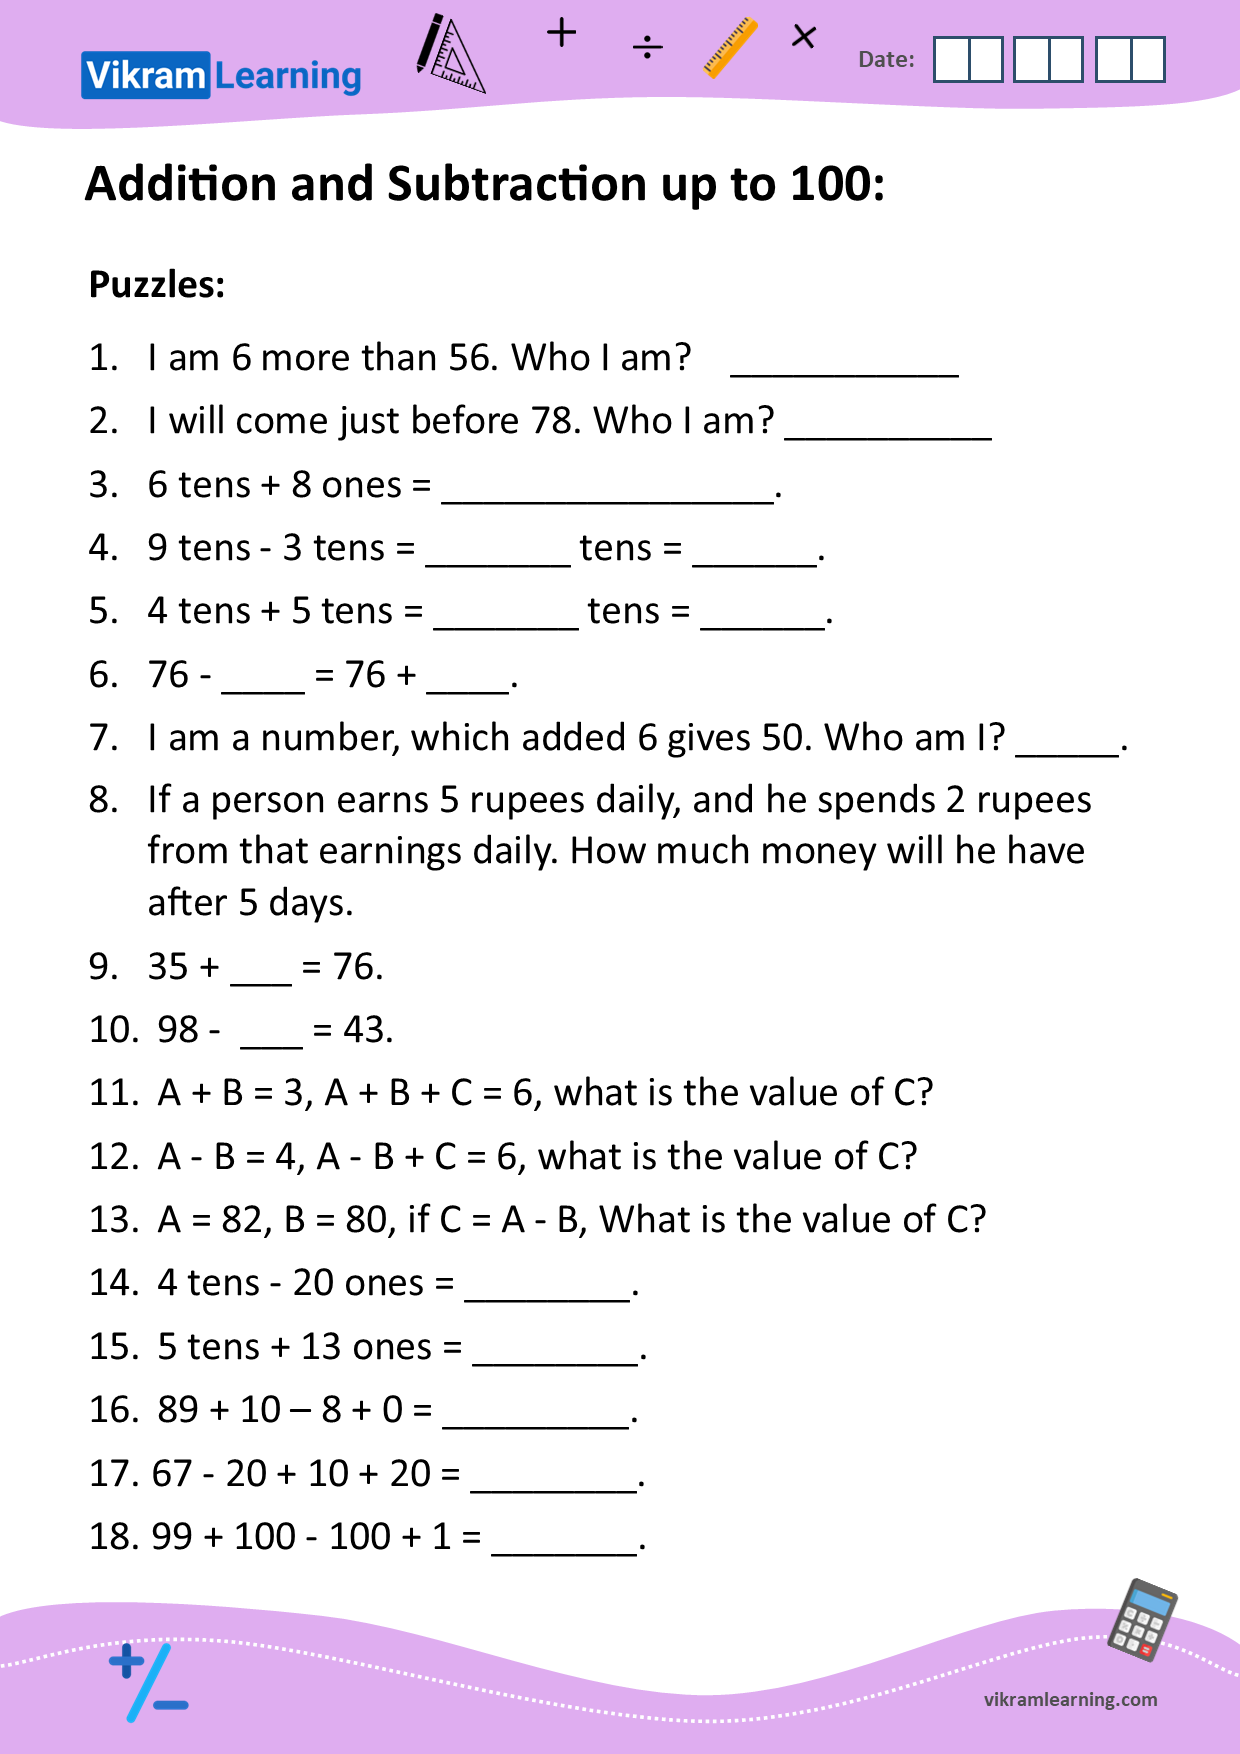 Download additions and subtractions up to 100 without regrouping worksheets